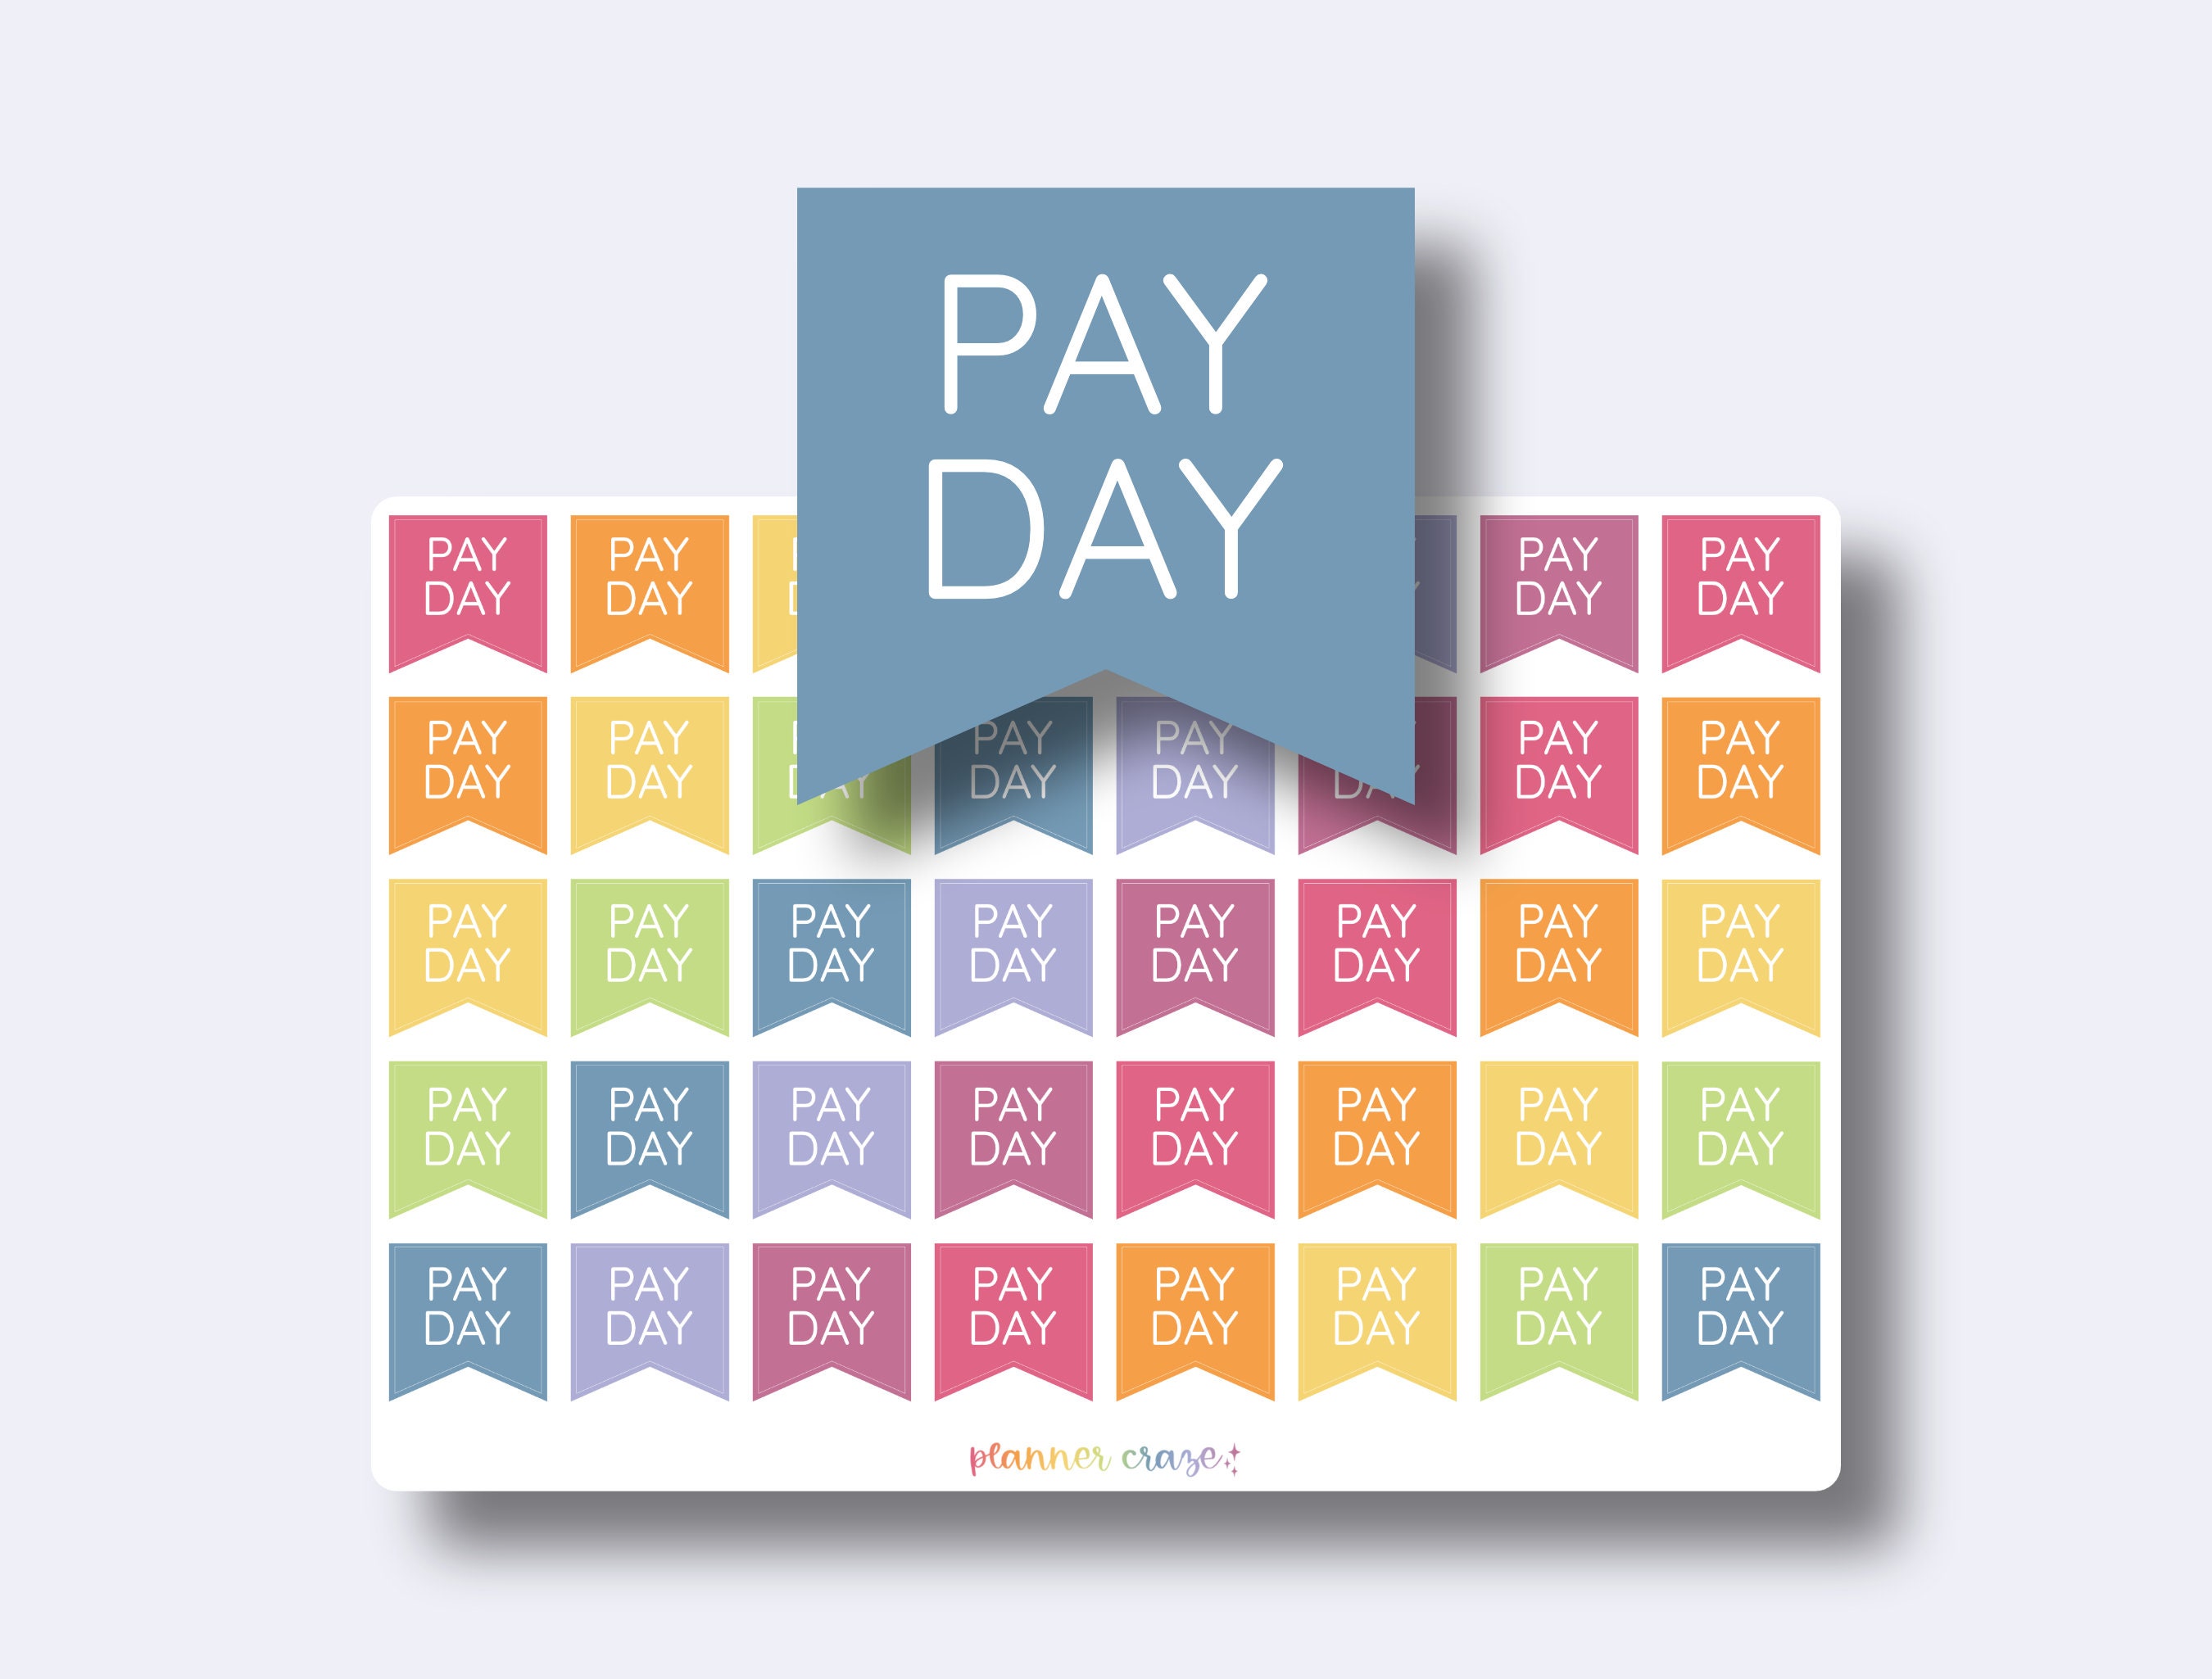 TPQ-001 Payday Budget Stickers, Payday Flag Stickers, Decorative